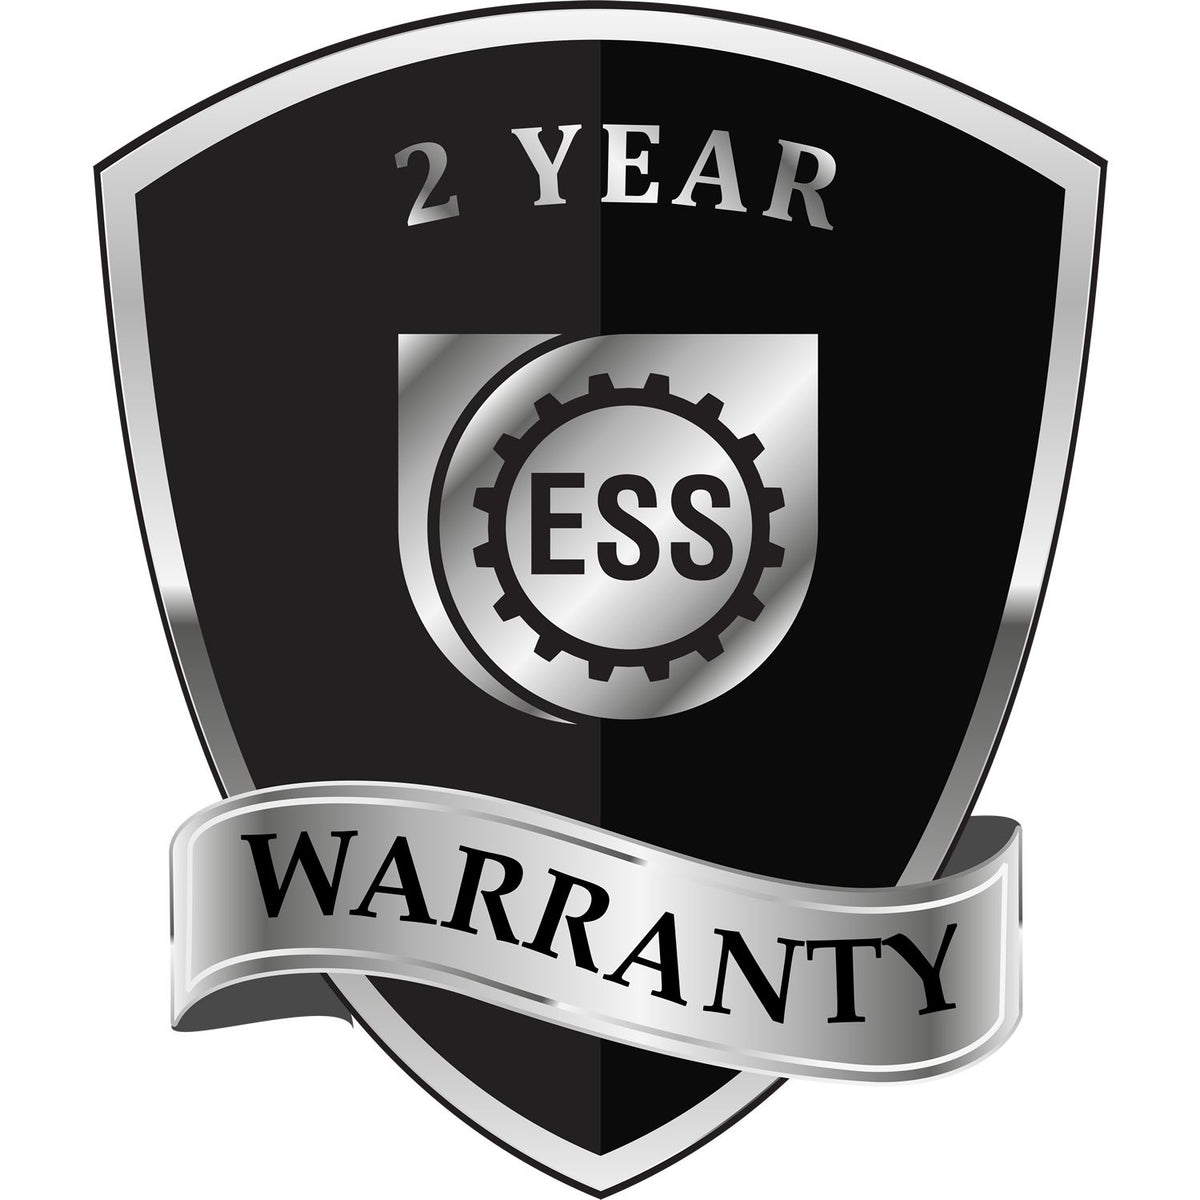 A badge or emblem showing a warranty icon for the Long Reach Indiana PE Seal